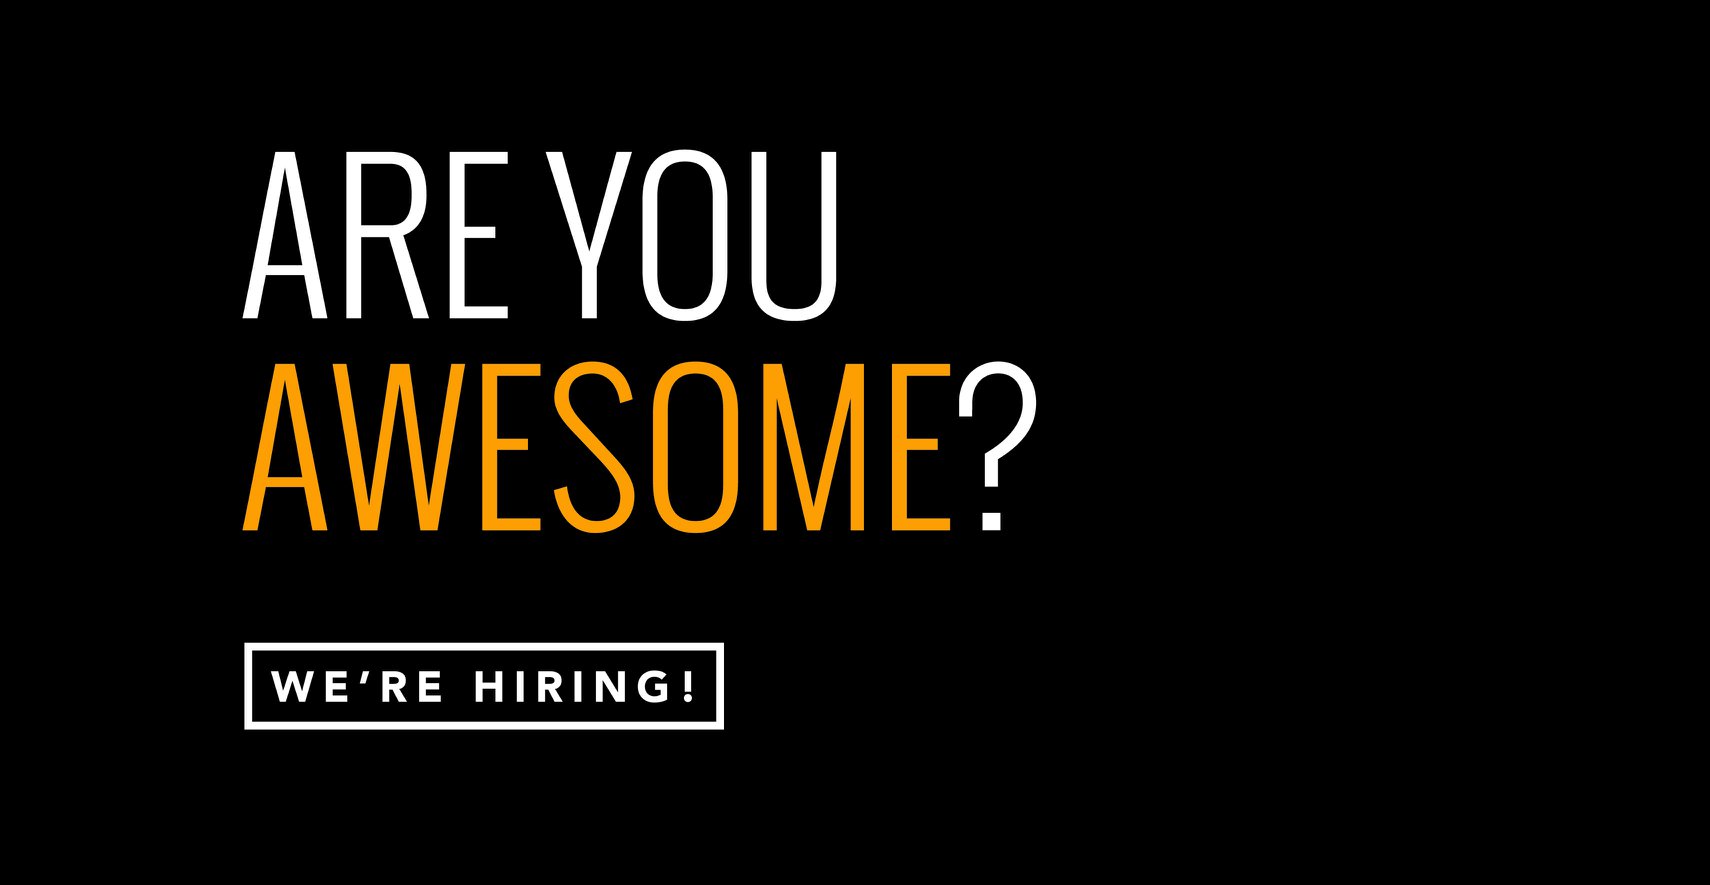 Are you awesome? We are hiring.